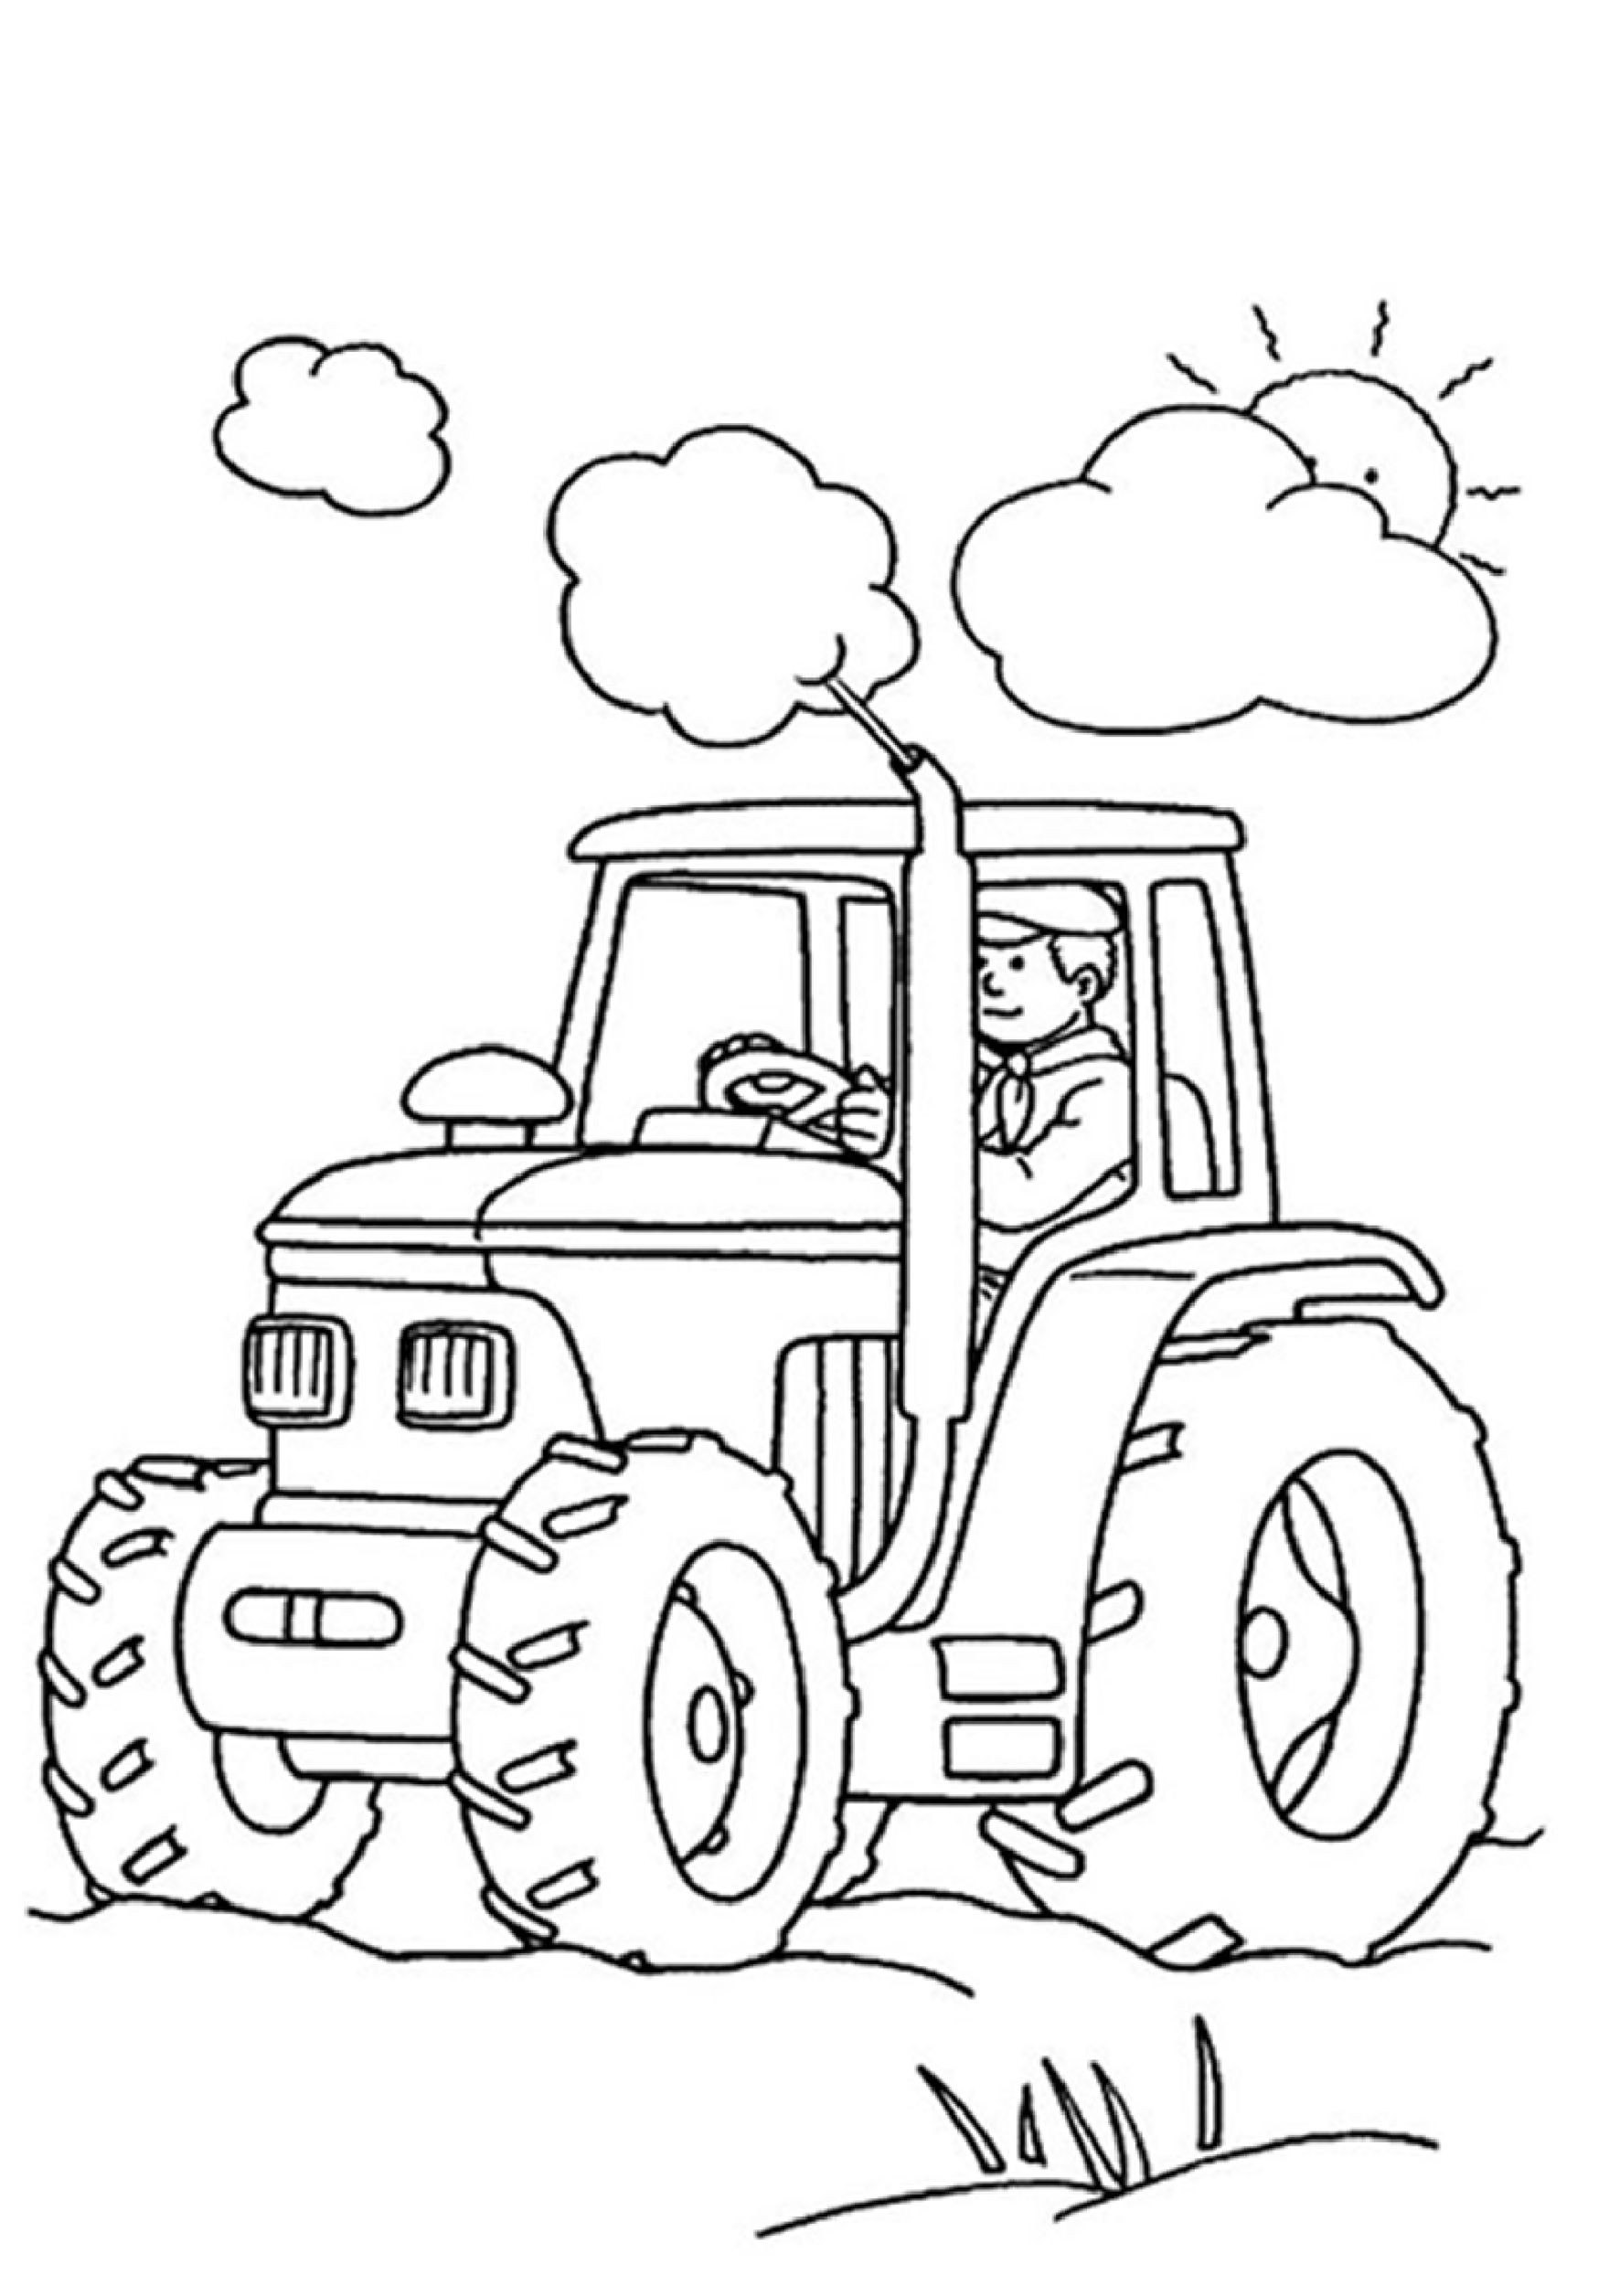 Toddler Coloring Pages Pdf
 Knowledge Free Printable Coloring Pages For Kids Resume